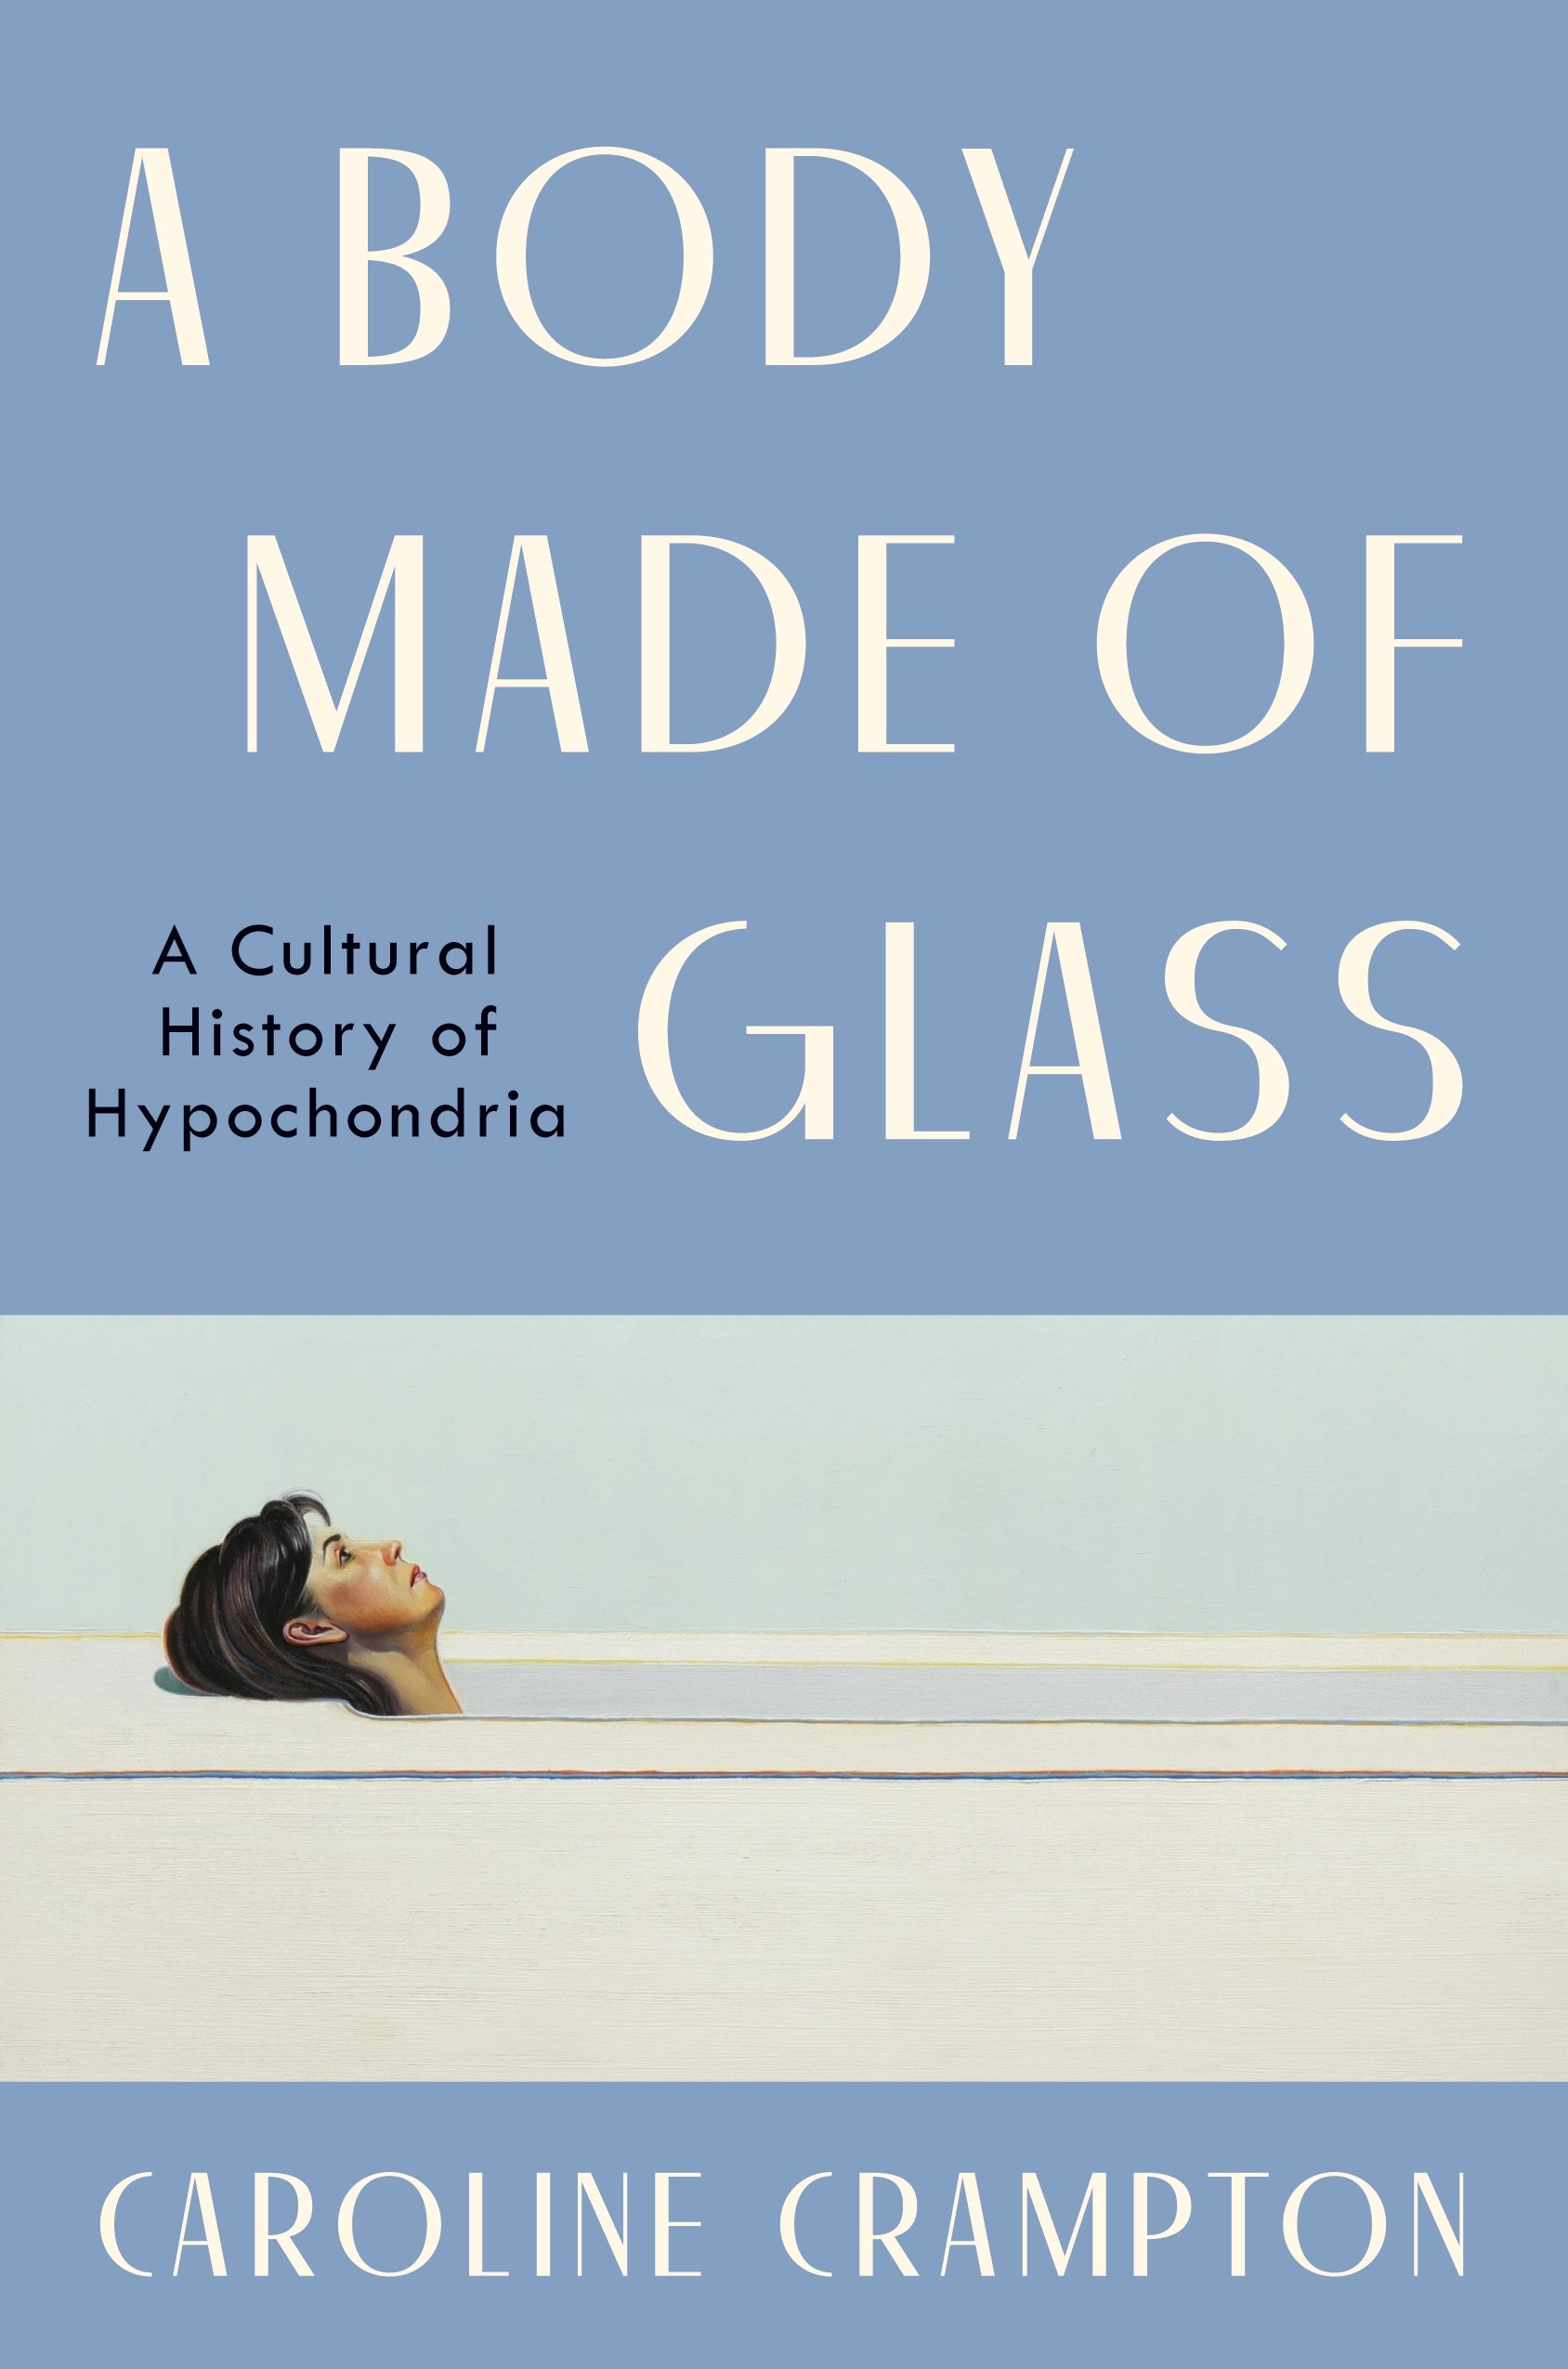 The cover of A Body Made of Glass.